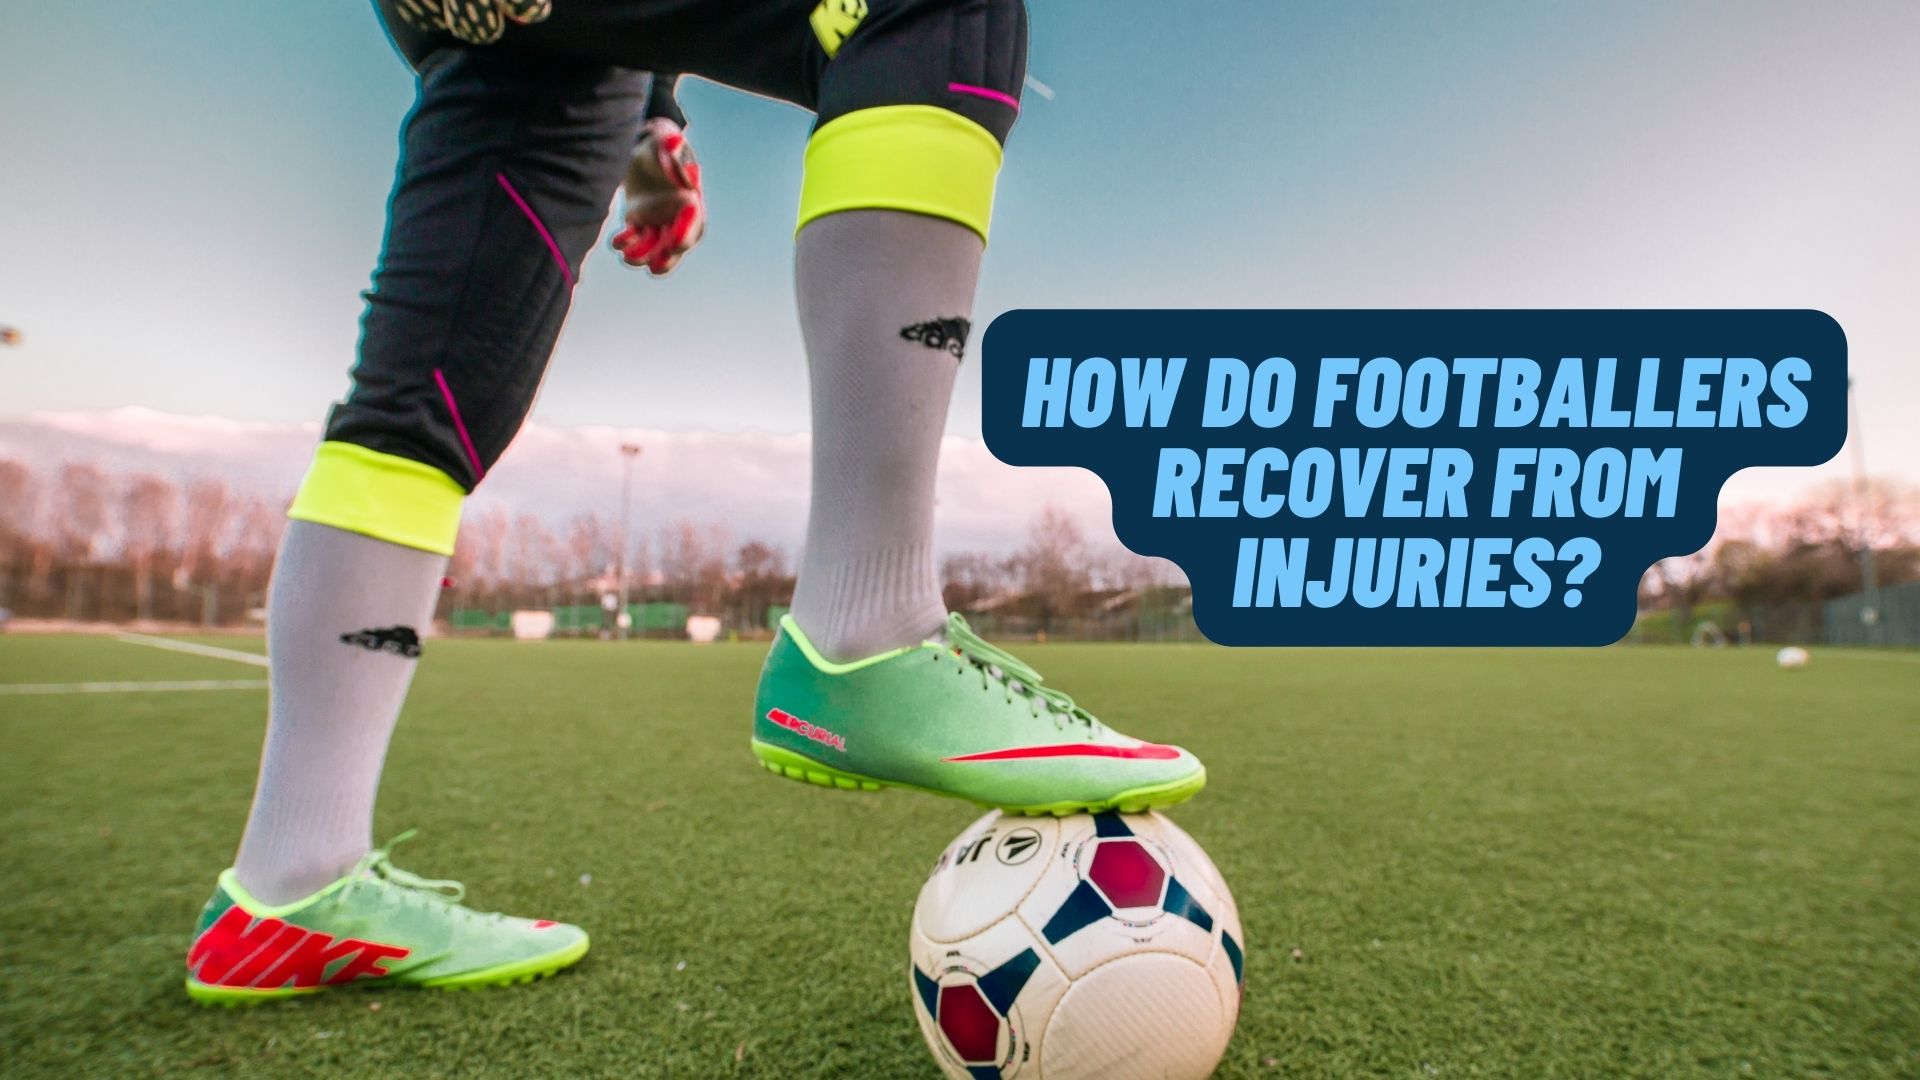 How Do Footballers Recover from Injuries?